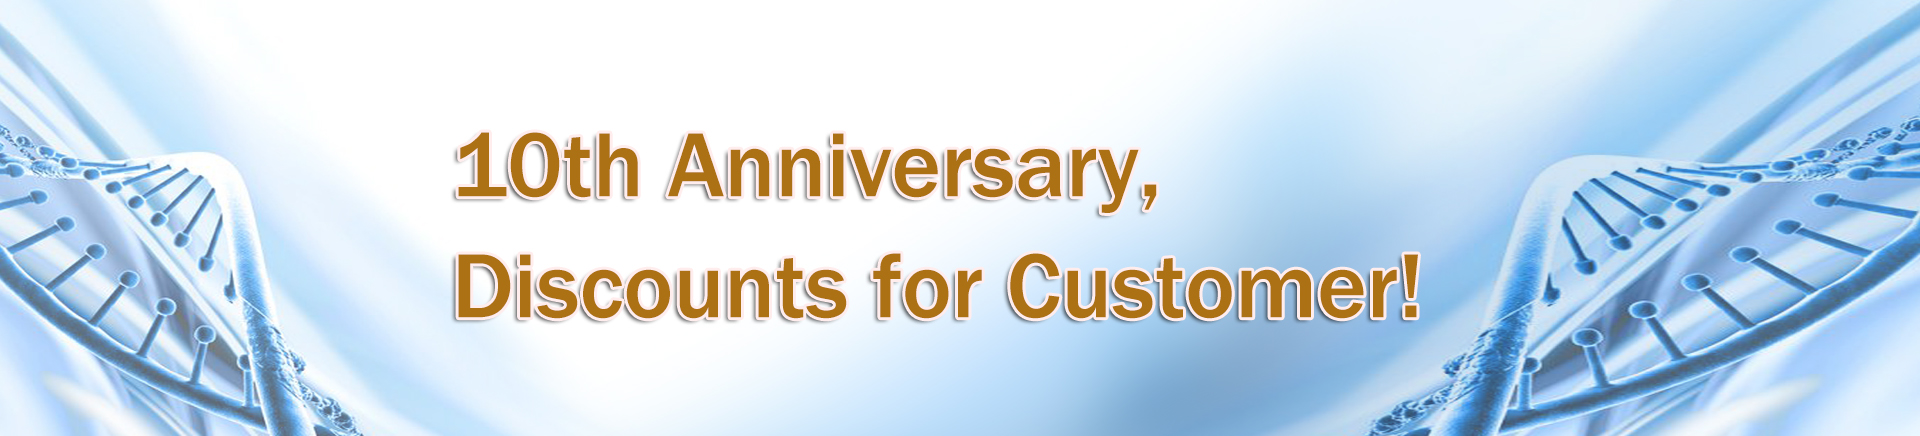 10th Anniversary, Discounts for Customer! 